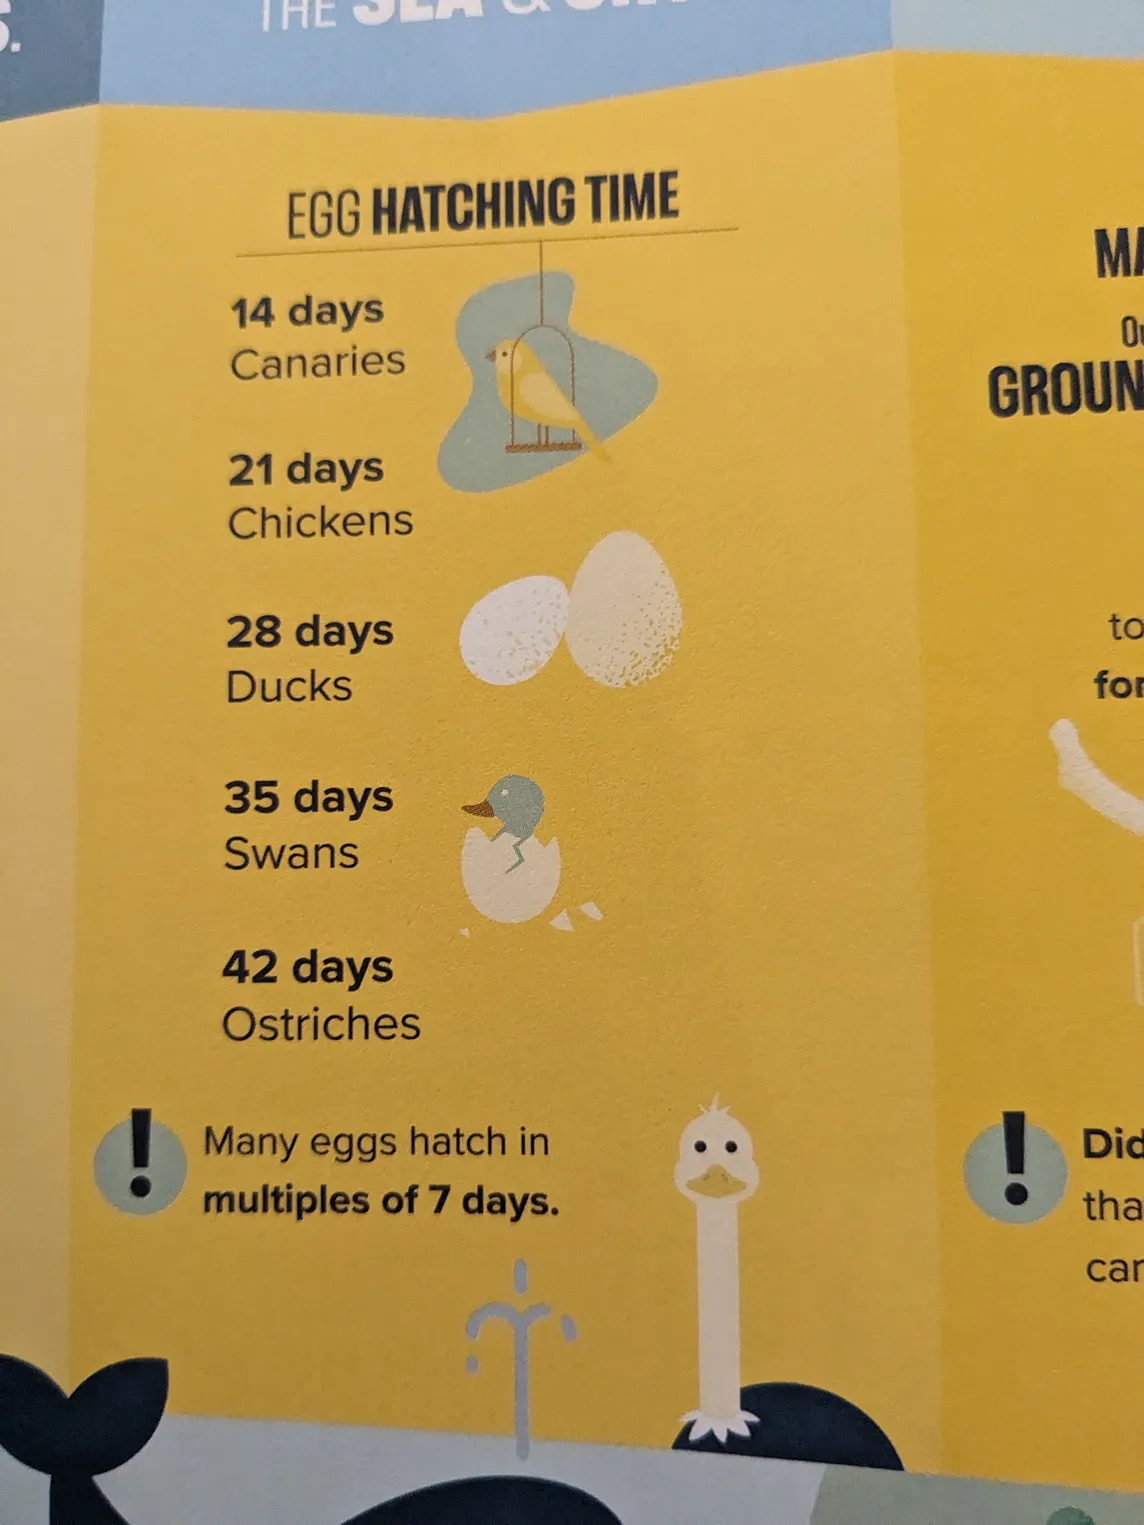 How many days before the eggs in a nest hatch?